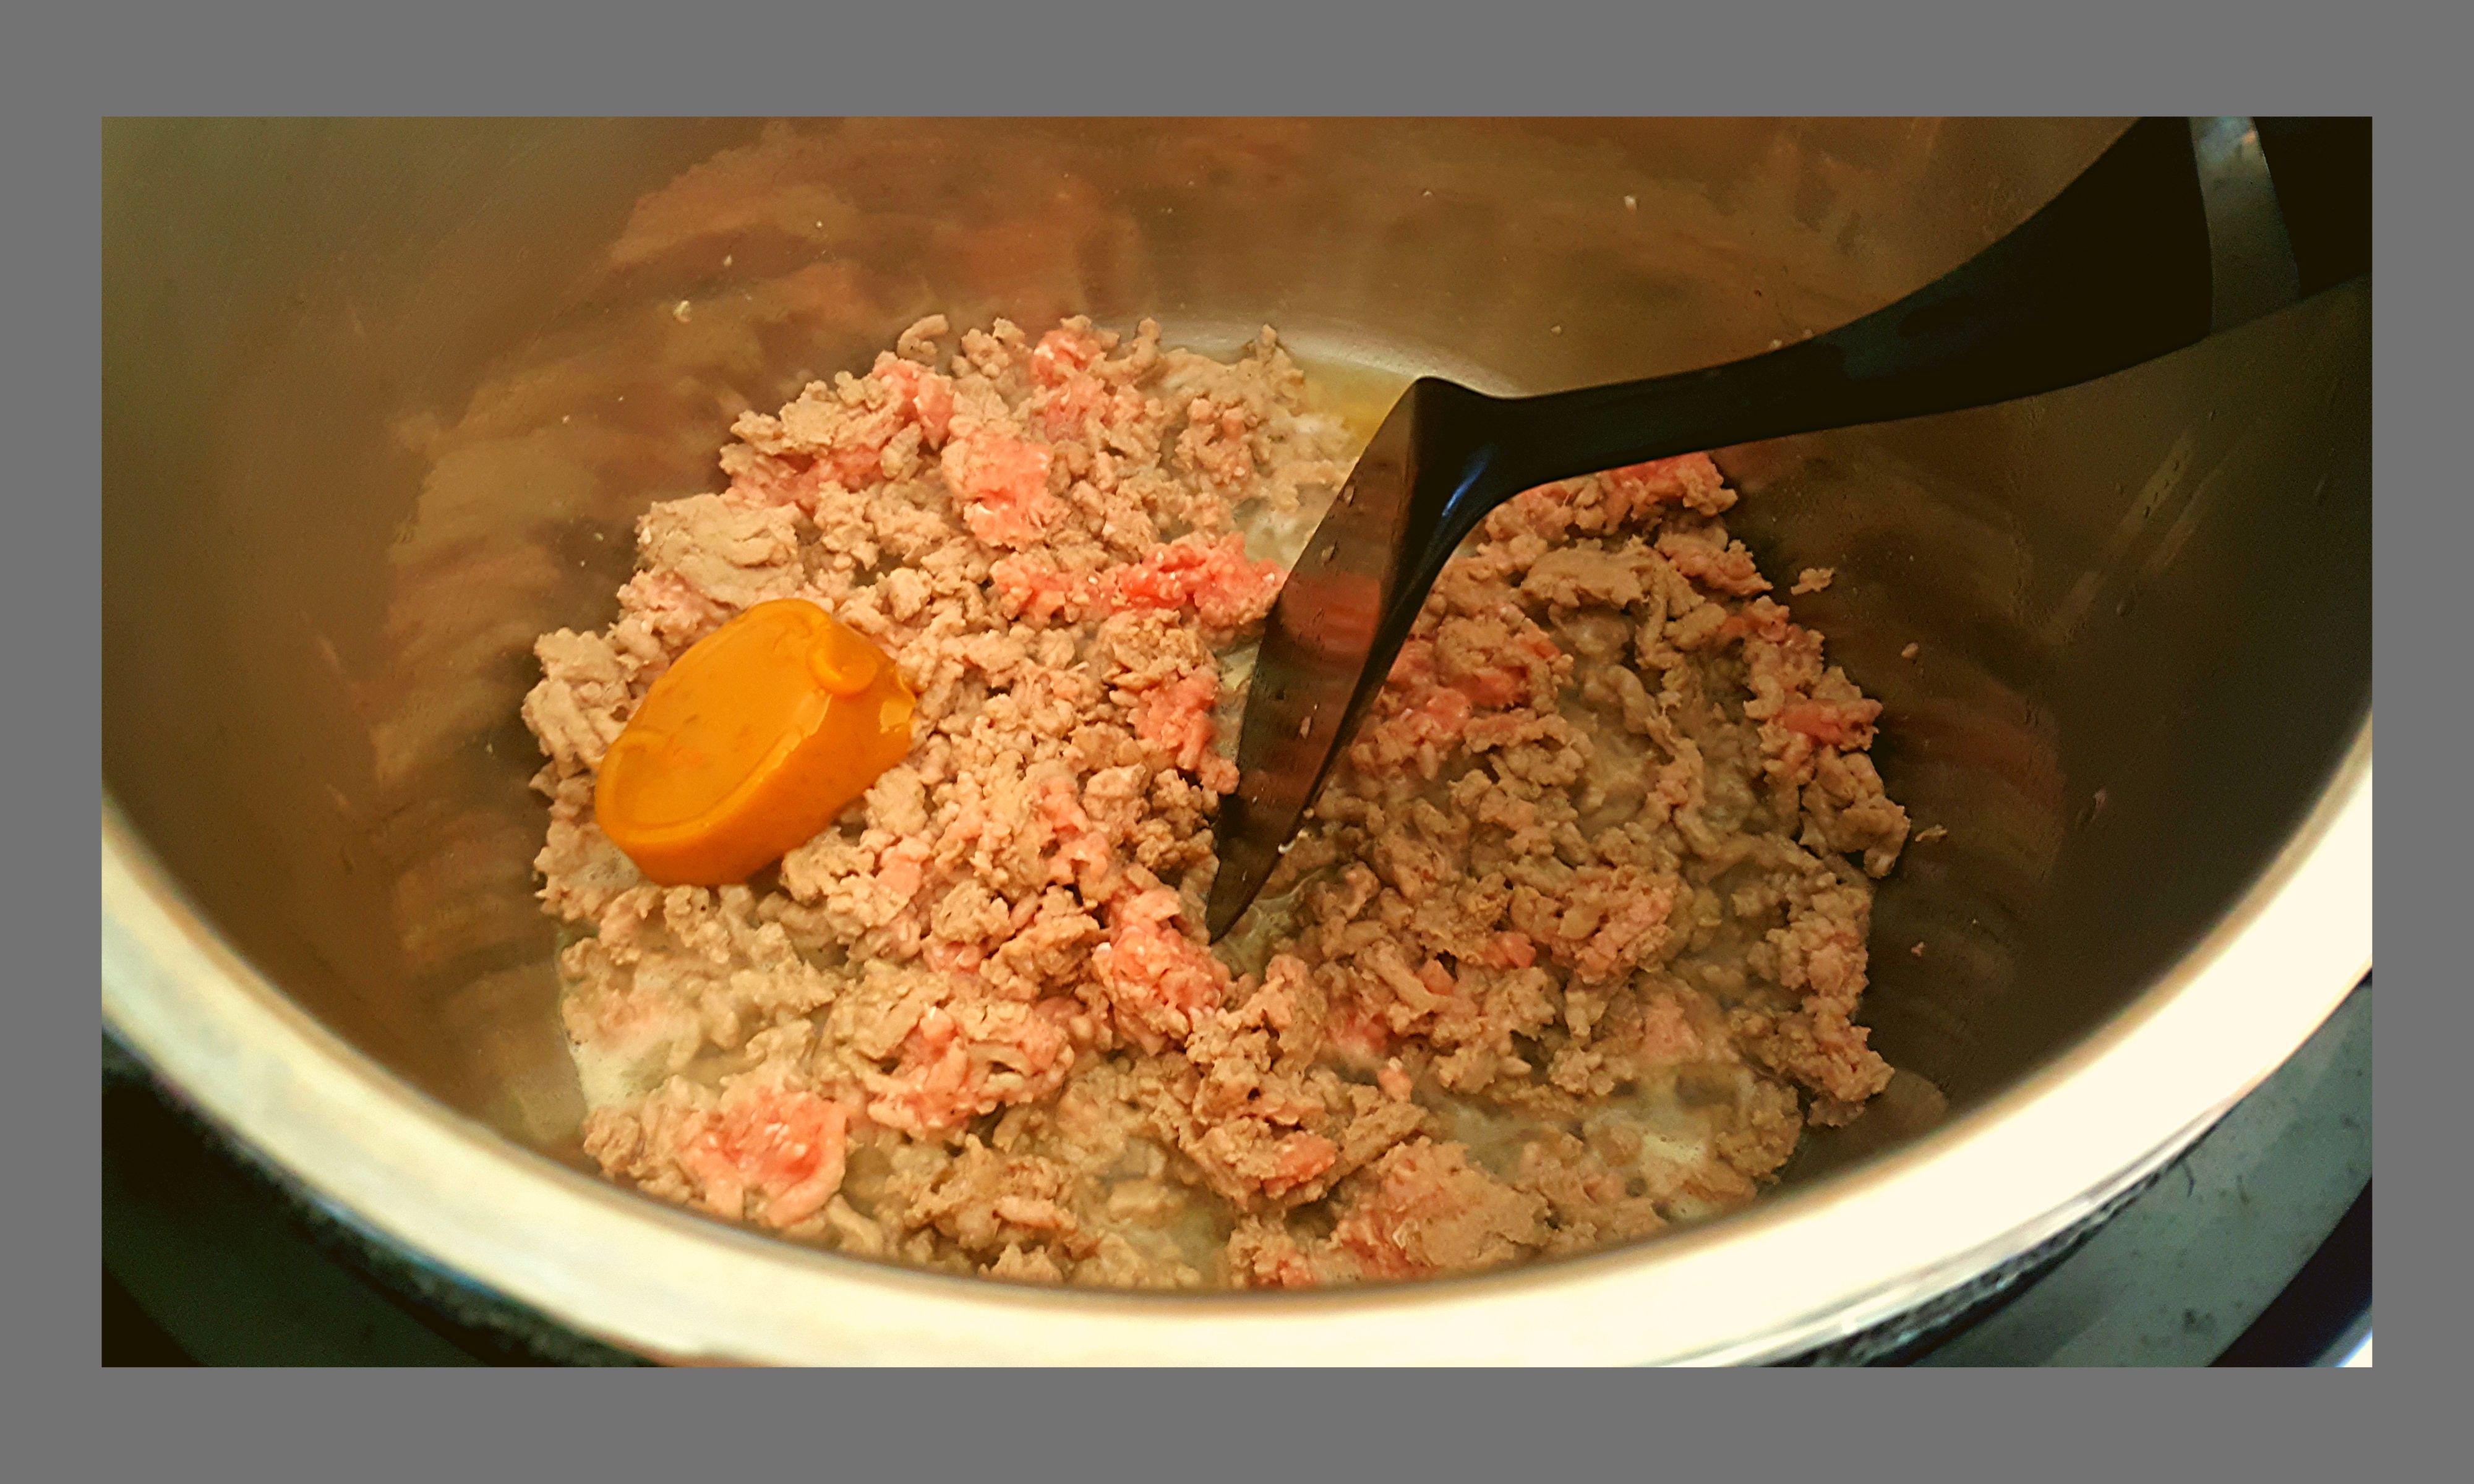 The inside of a silver Instant pot filled with raw ground turkey and a Knorr Chicken stock concetrate while it is browning.